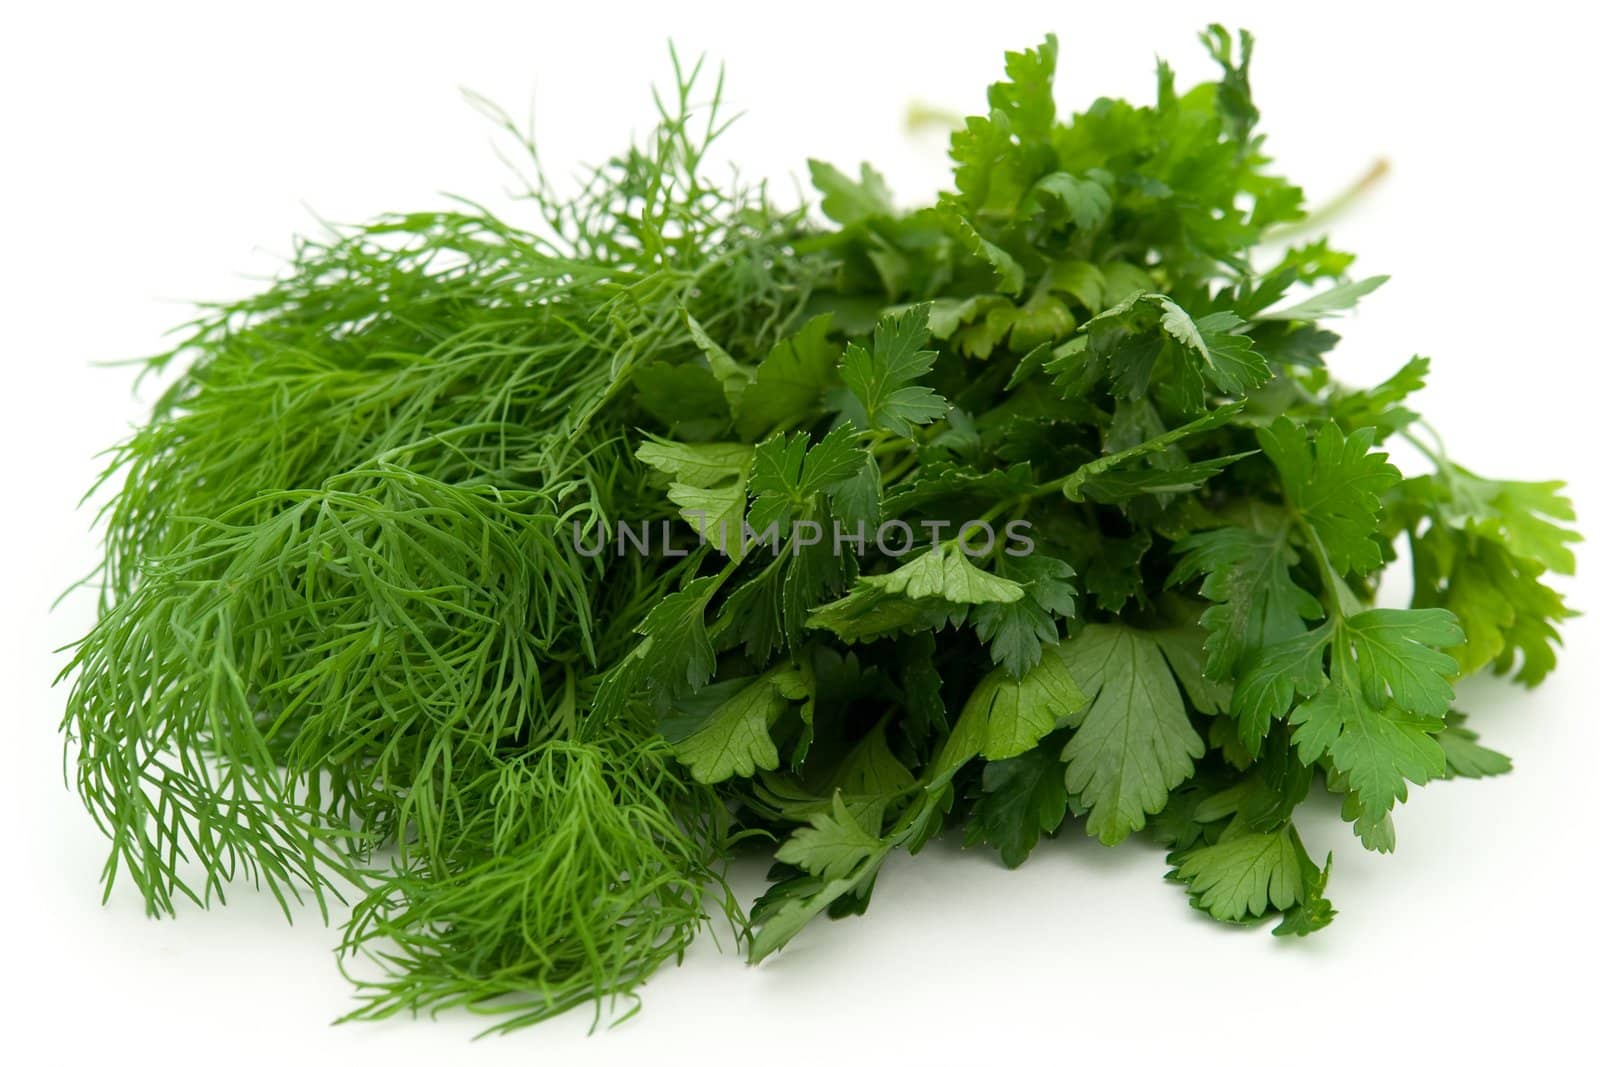 Fresh green dill and parsley by stepanov